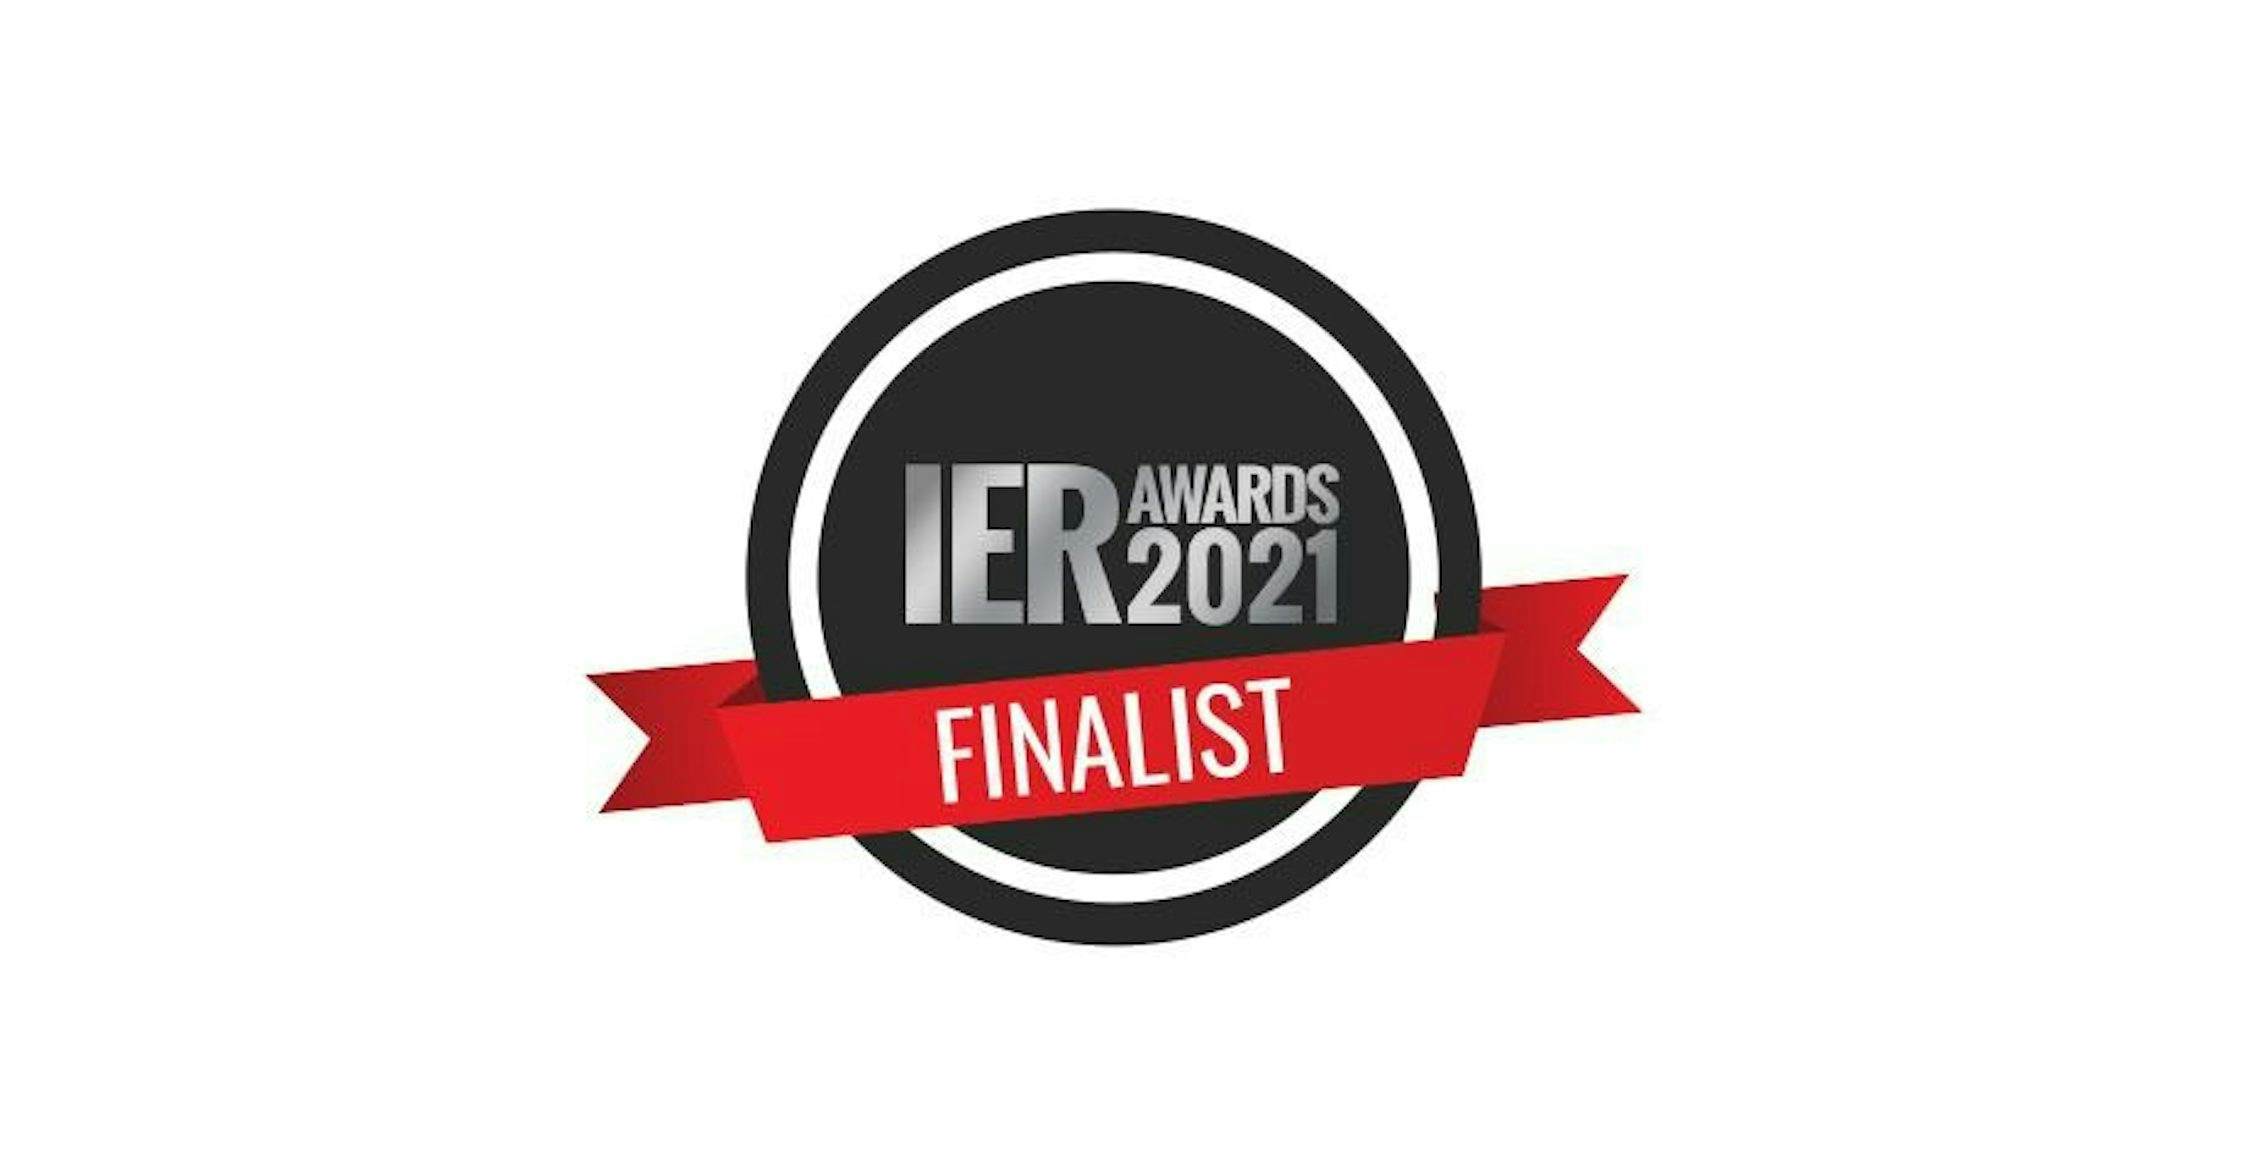 Forbes is thrilled to be shortlisted for two prestigious IER awards.